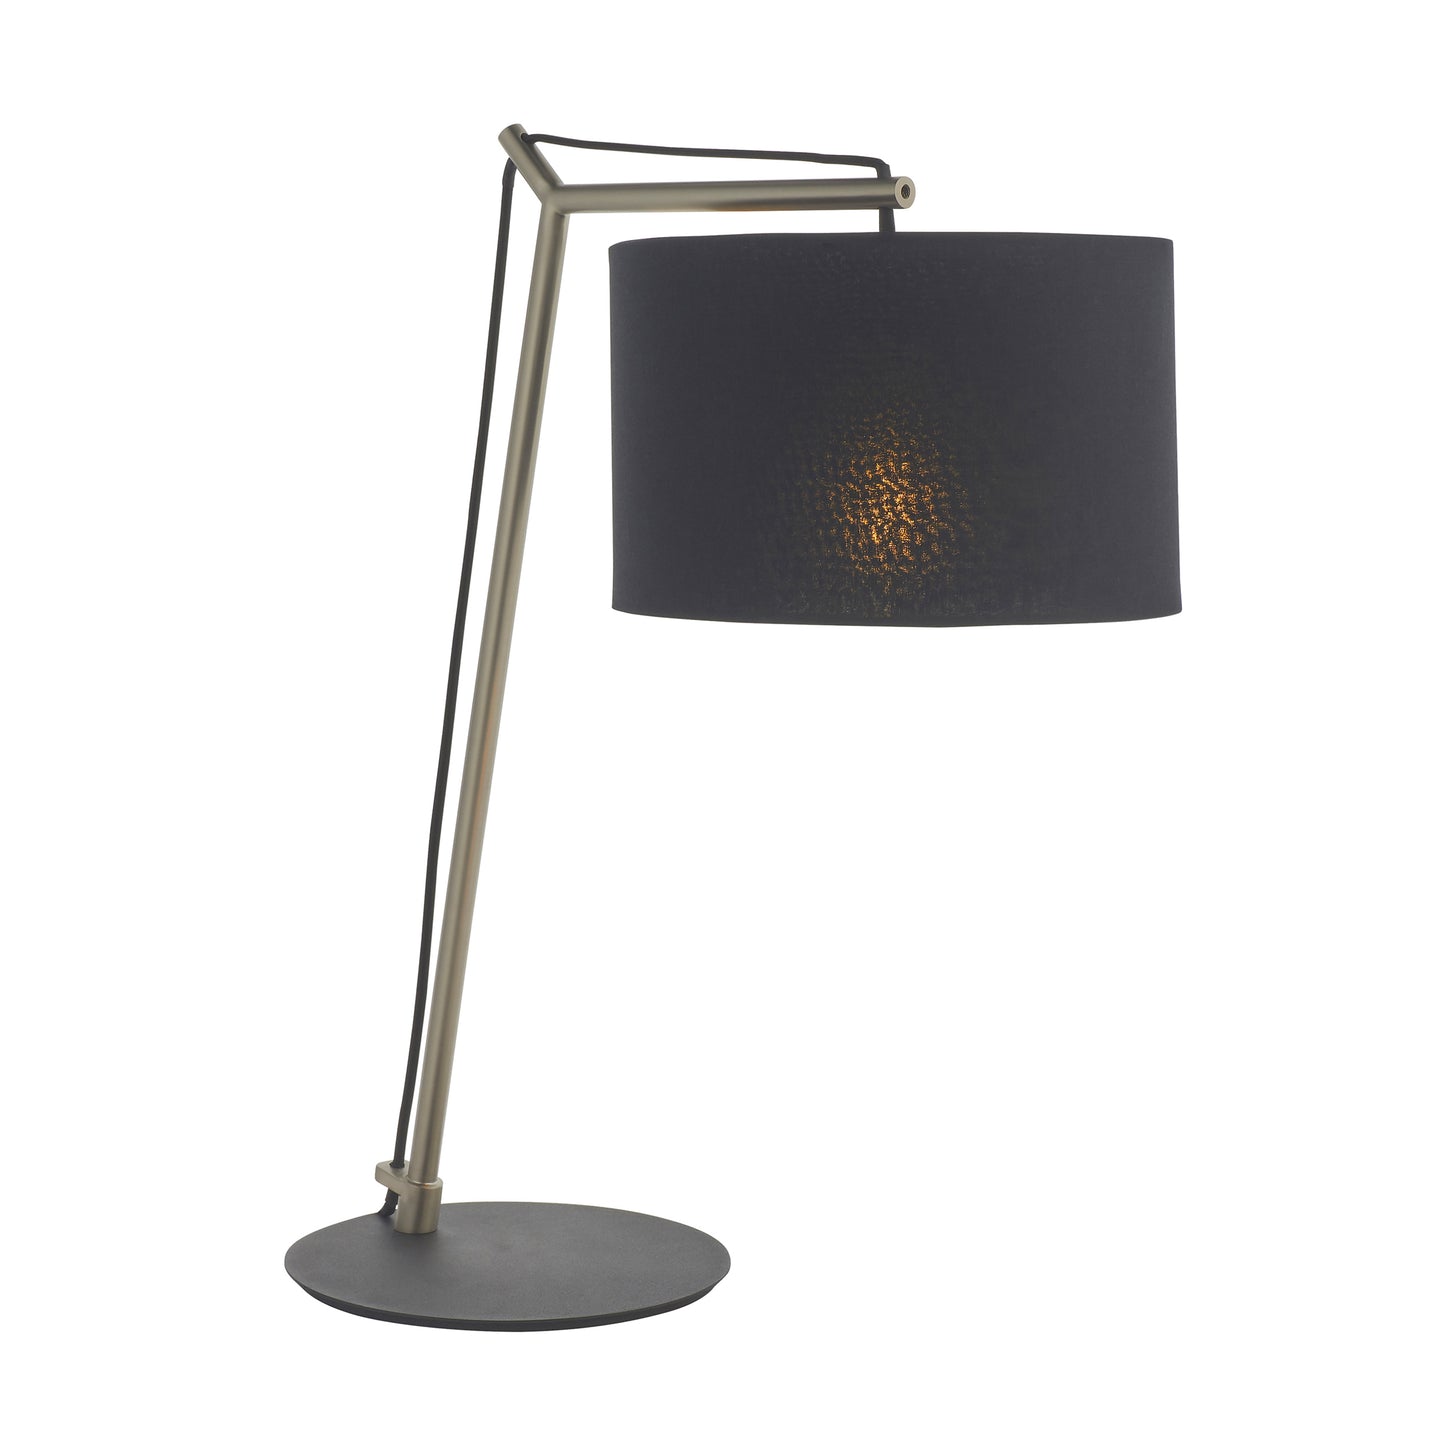 A Buckland Table Lamp Antique Nickel with a black shade and brass base for interior decor/home furniture.